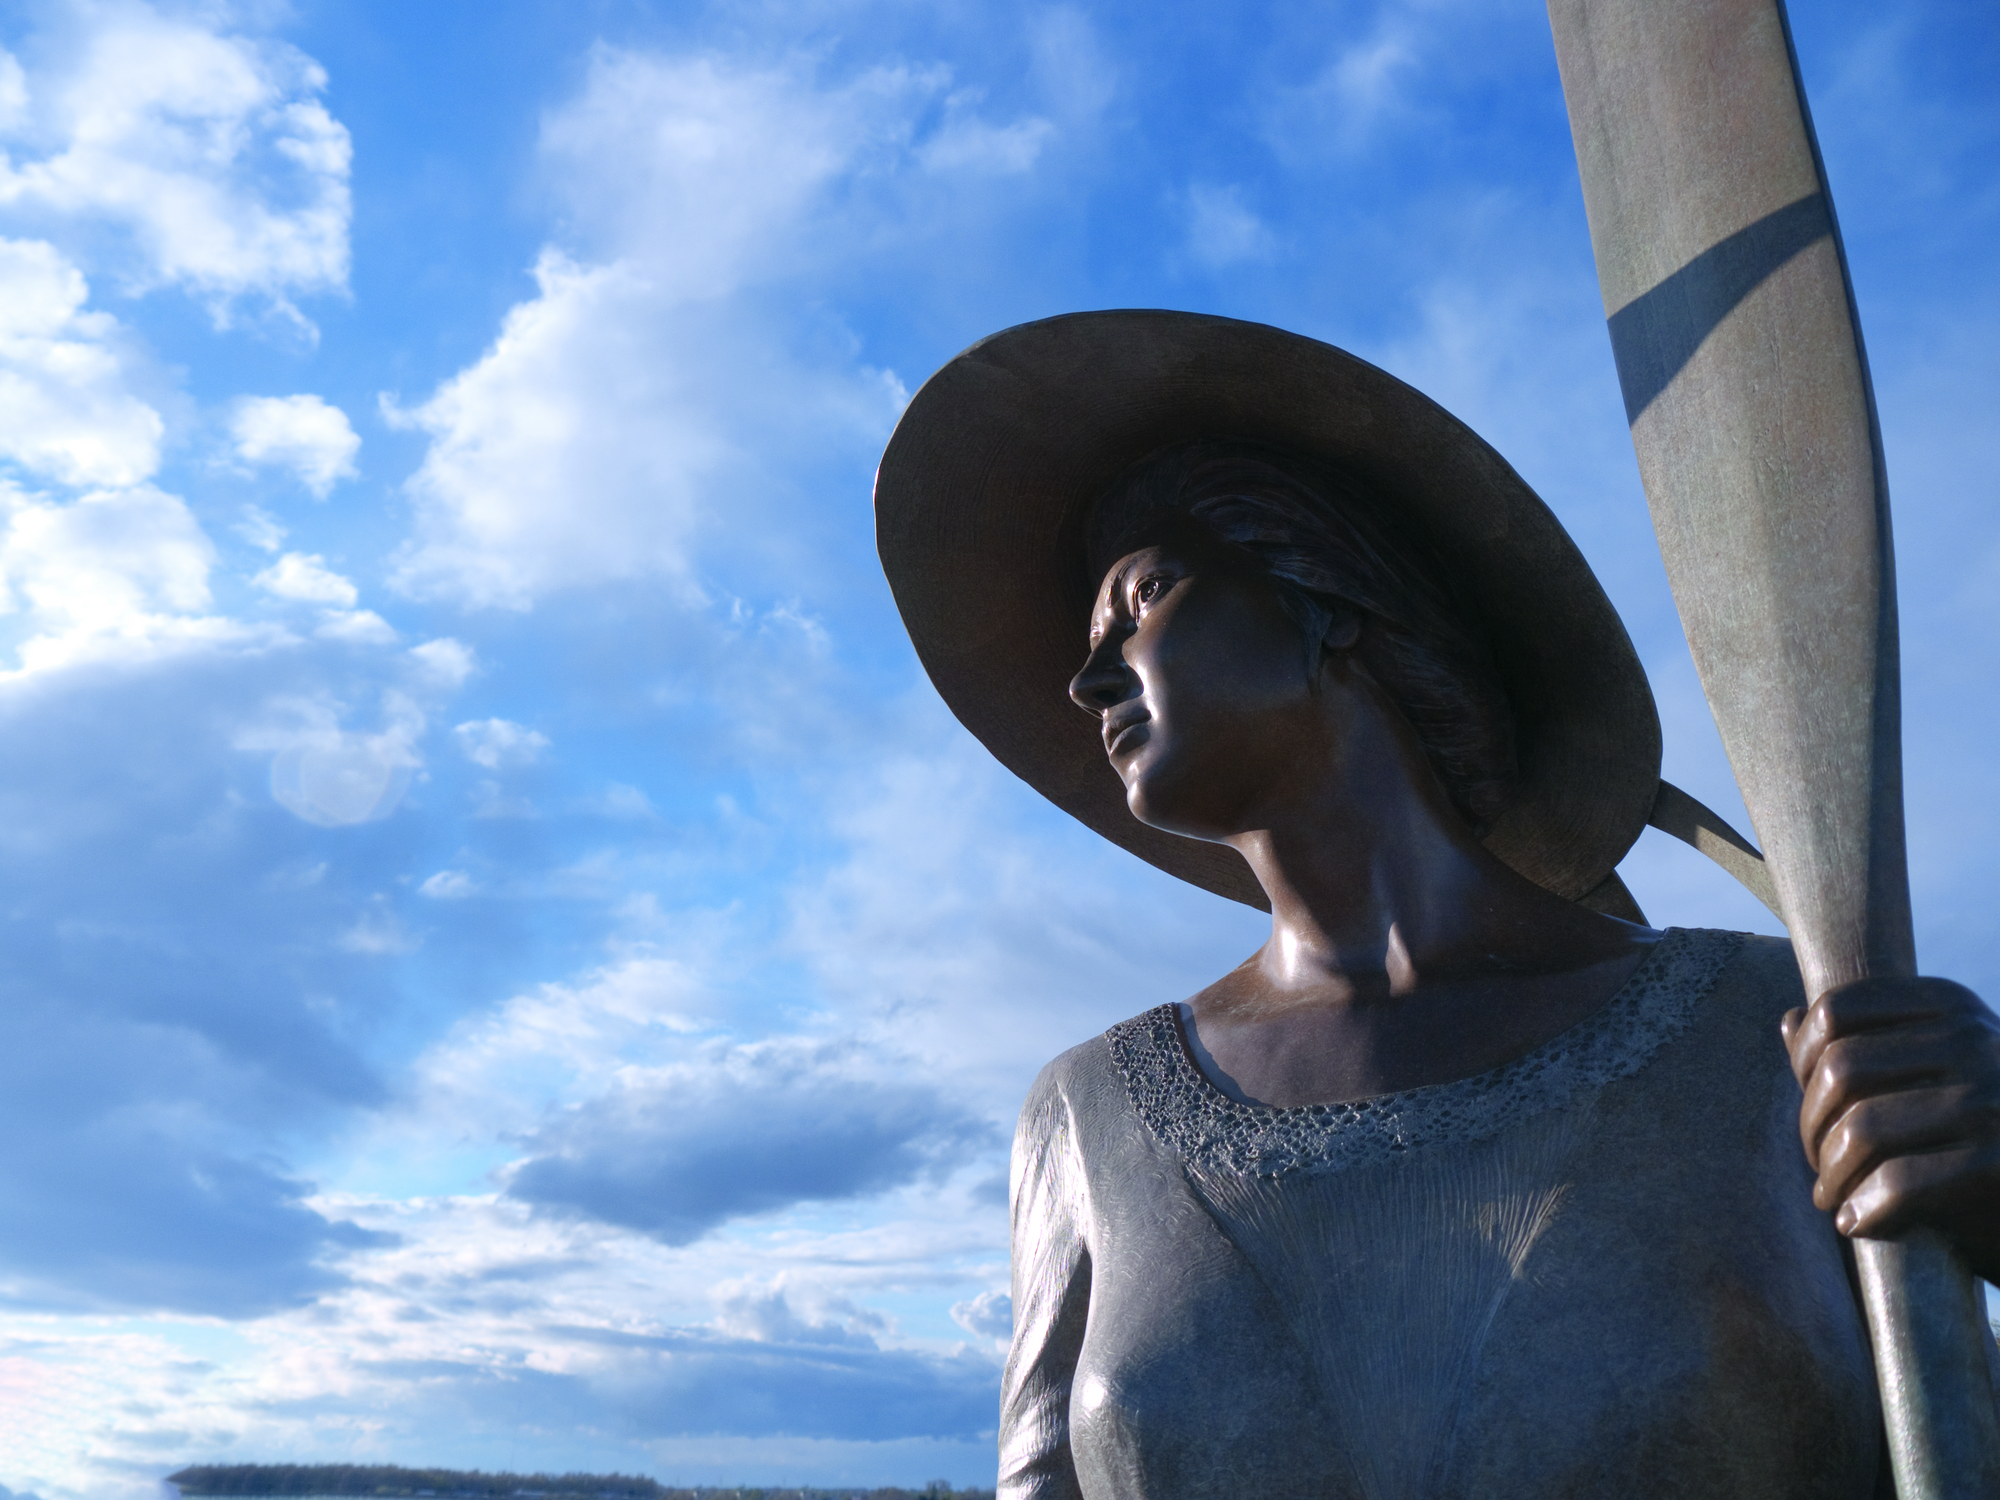 Statue of a woman holding an oar, looking out toward the water on Clover Island in Kennewick.